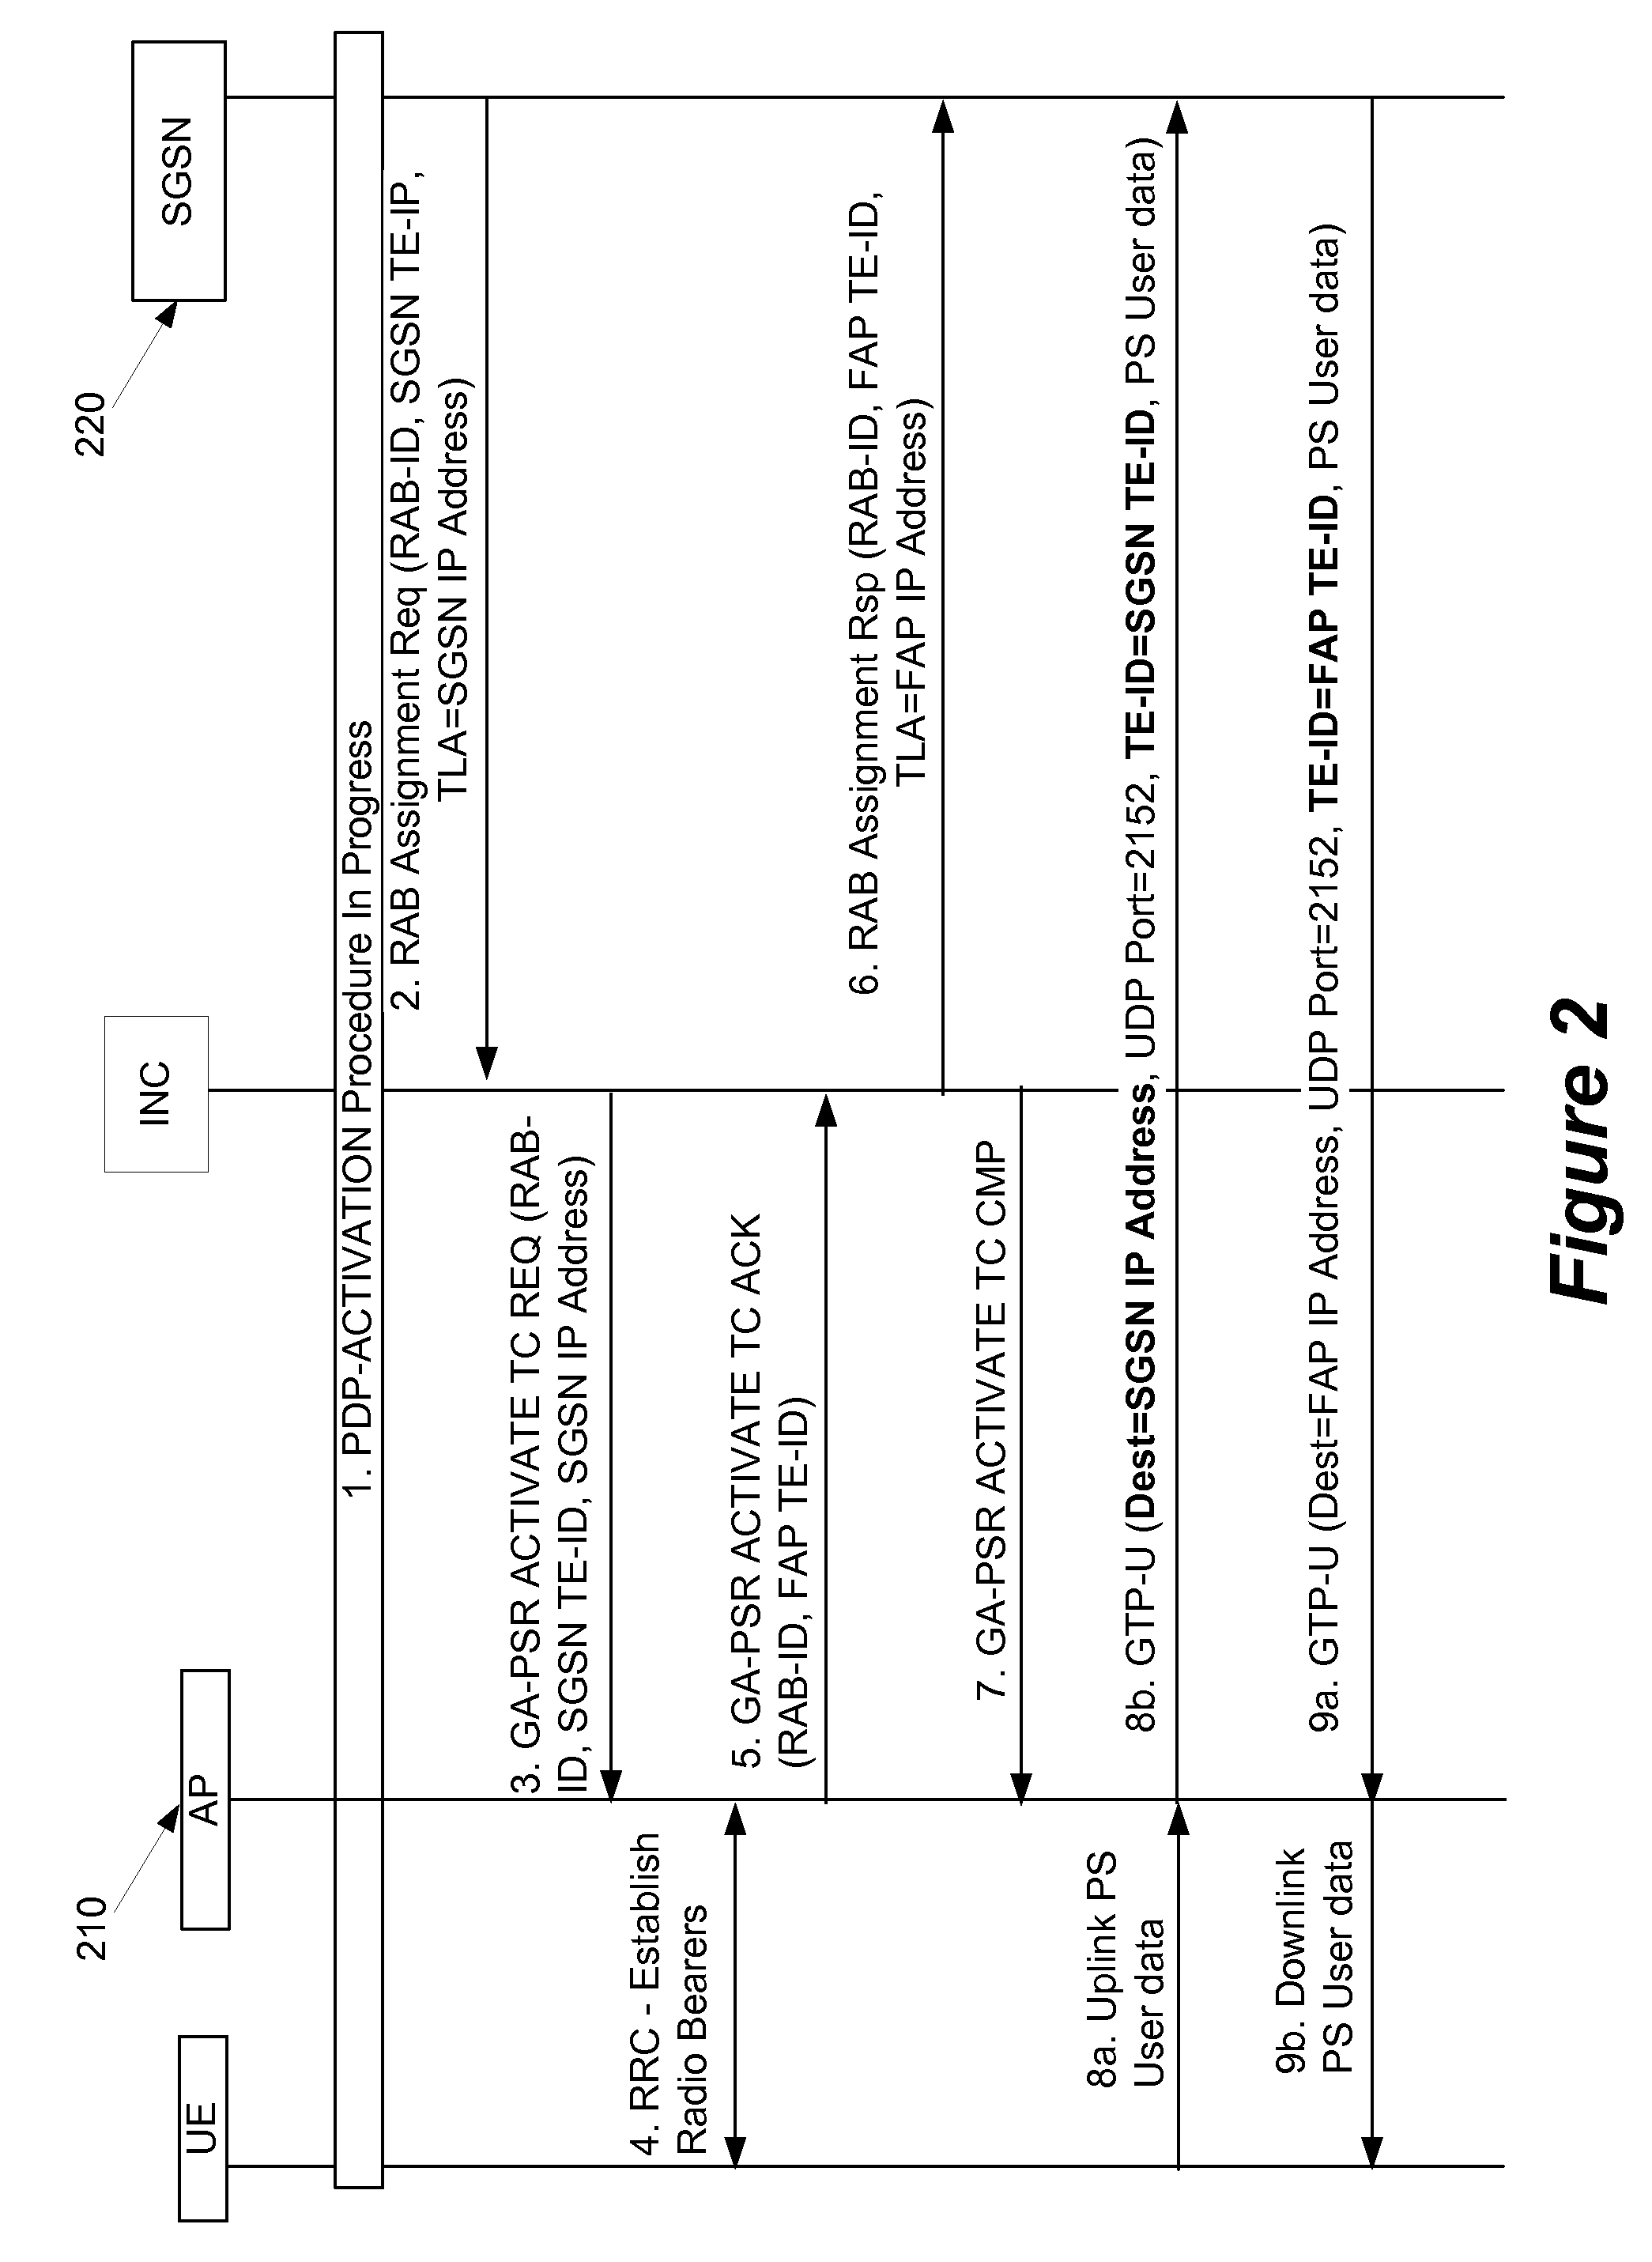 Method and System for Supporting Large Number of Data Paths in an Integrated Communication System